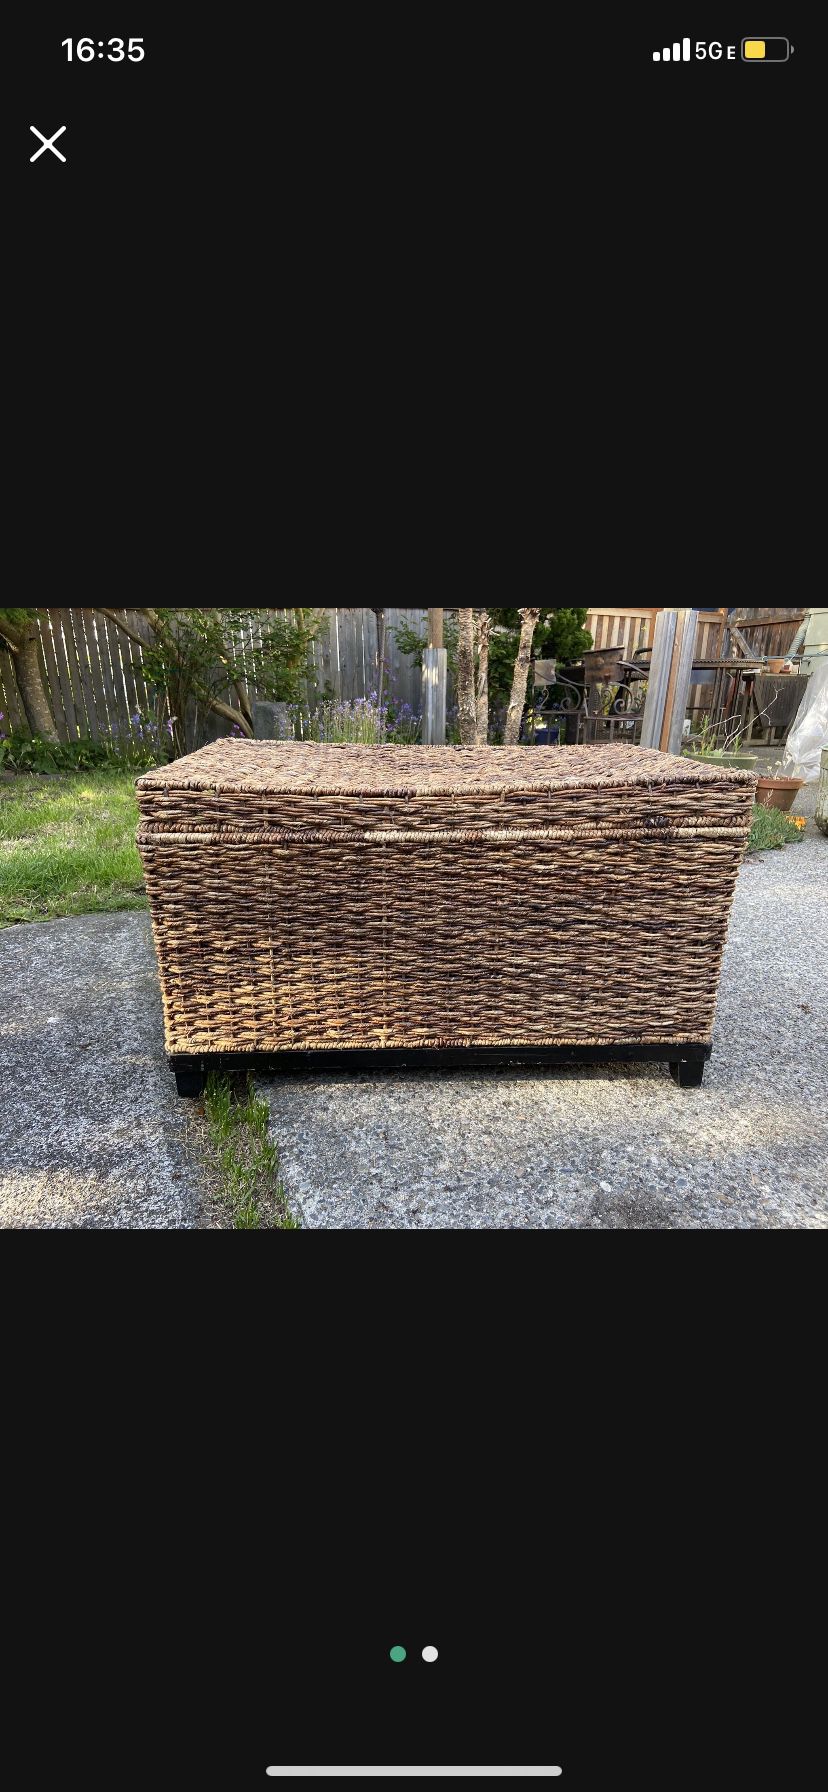 Large Wicker Chest With Lid